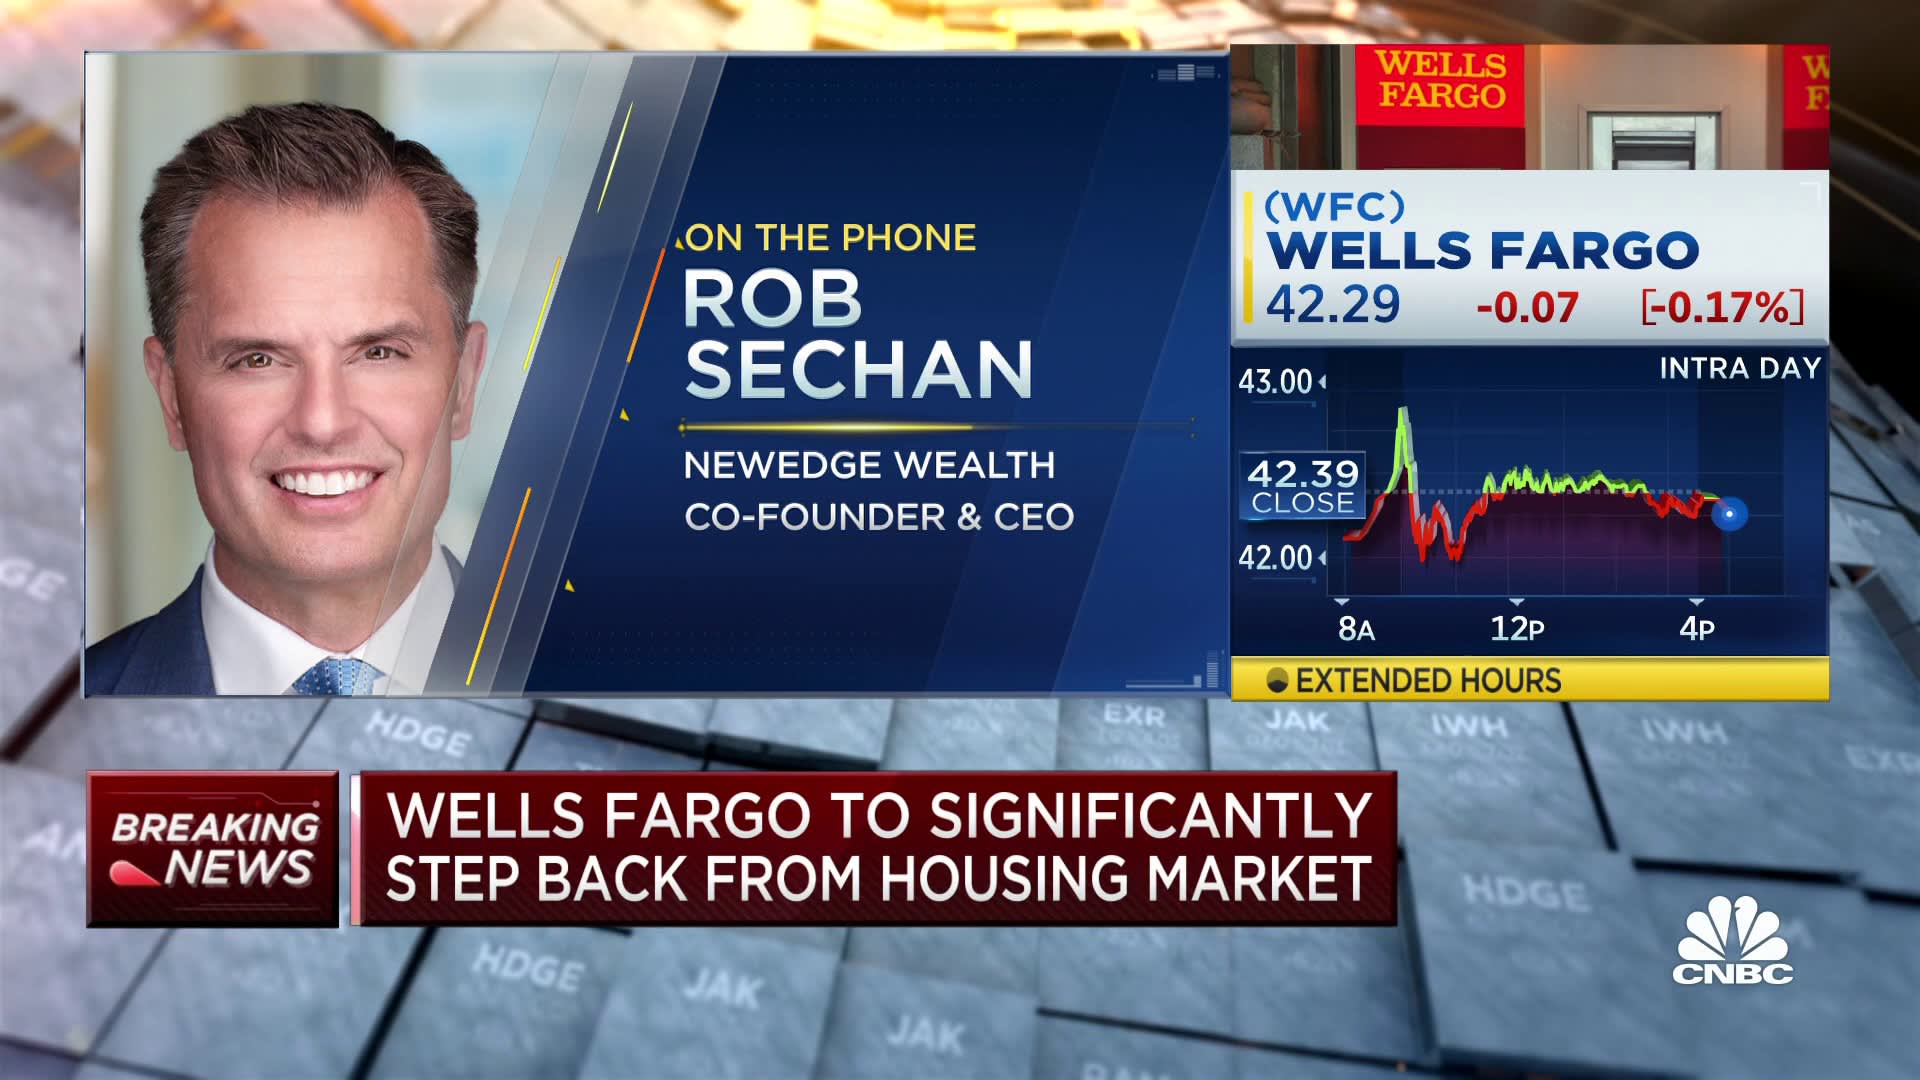 Wells Fargo stepping back from housing shows the impact of rising interest rates, says NewEdge’s Sechan